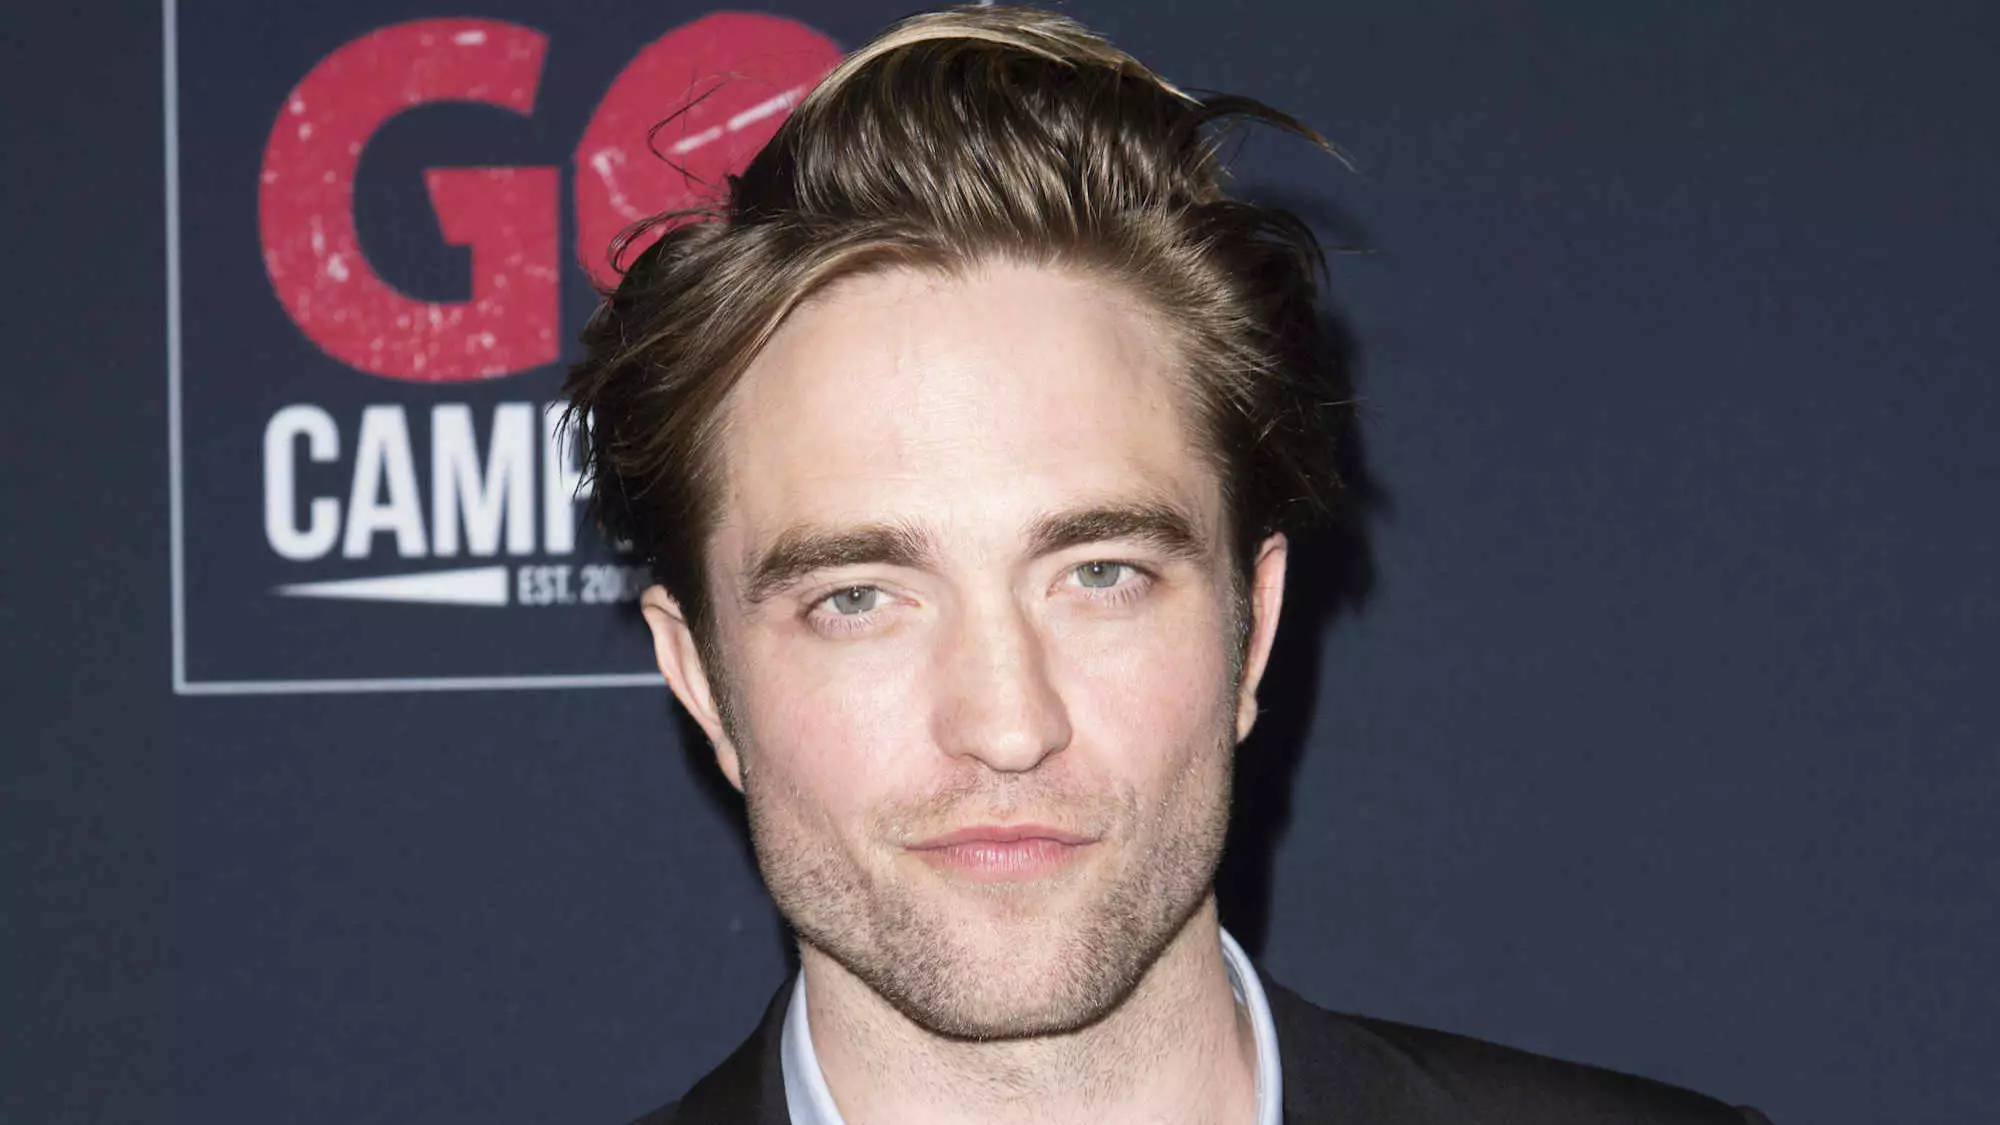 Robert Pattinson's New Netflix Thriller Will Have You Utterly Hooked